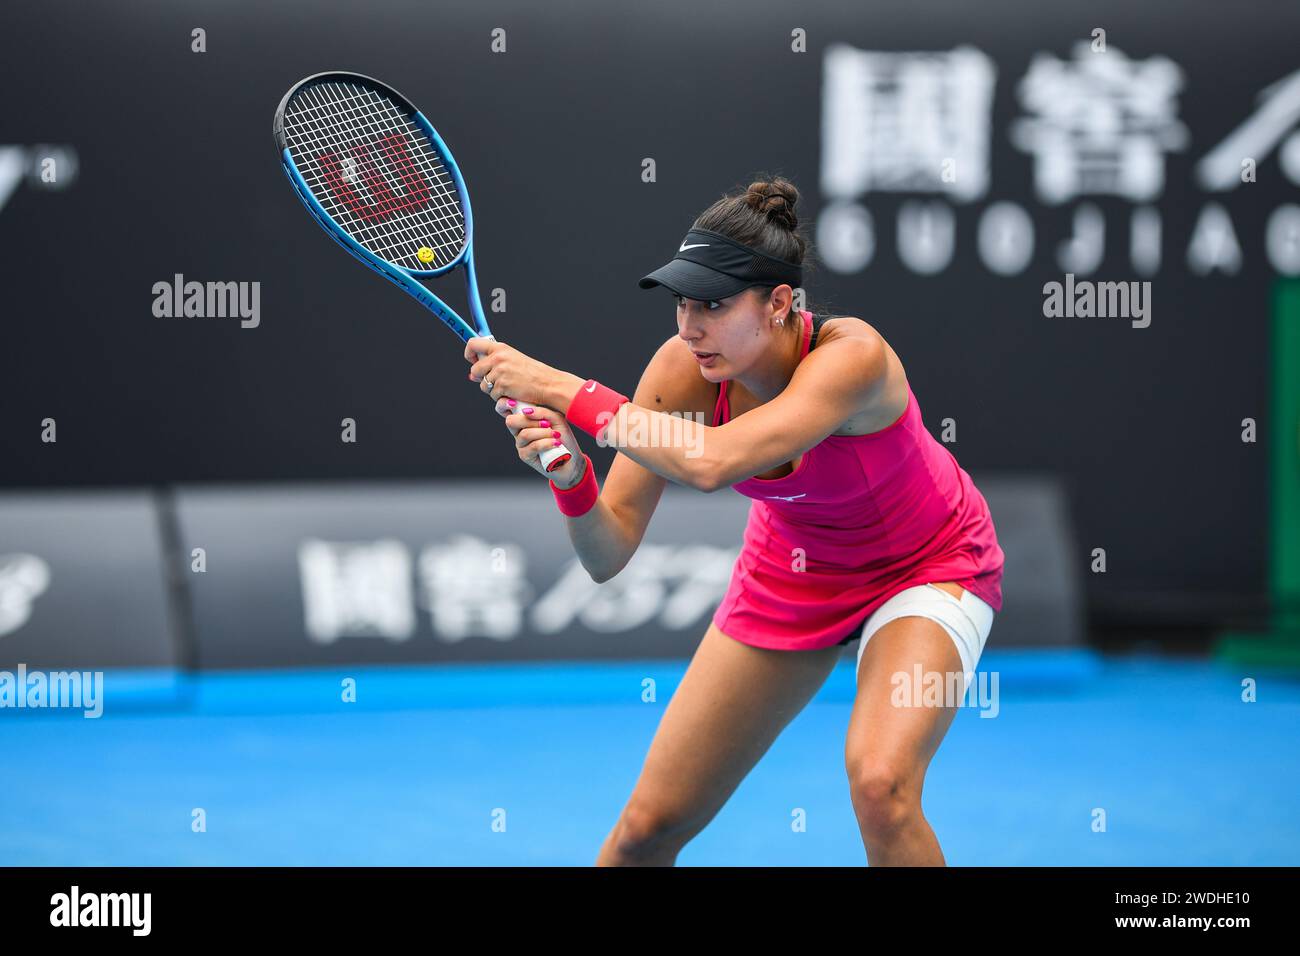 Melbourne, Australia. 20th Jan, 2024. Oceane Dodin of France plays against Clara Burel of France(not in picture) during Round 3 match of the Australian Open Tennis Tournament at Melbourne Park. Oceane Dodin wins Clara Burel in 2 sets with a score 6-2, 6-4. (Photo by Alexander Bogatyrev/SOPA Images/Sipa USA) Credit: Sipa USA/Alamy Live News Stock Photo